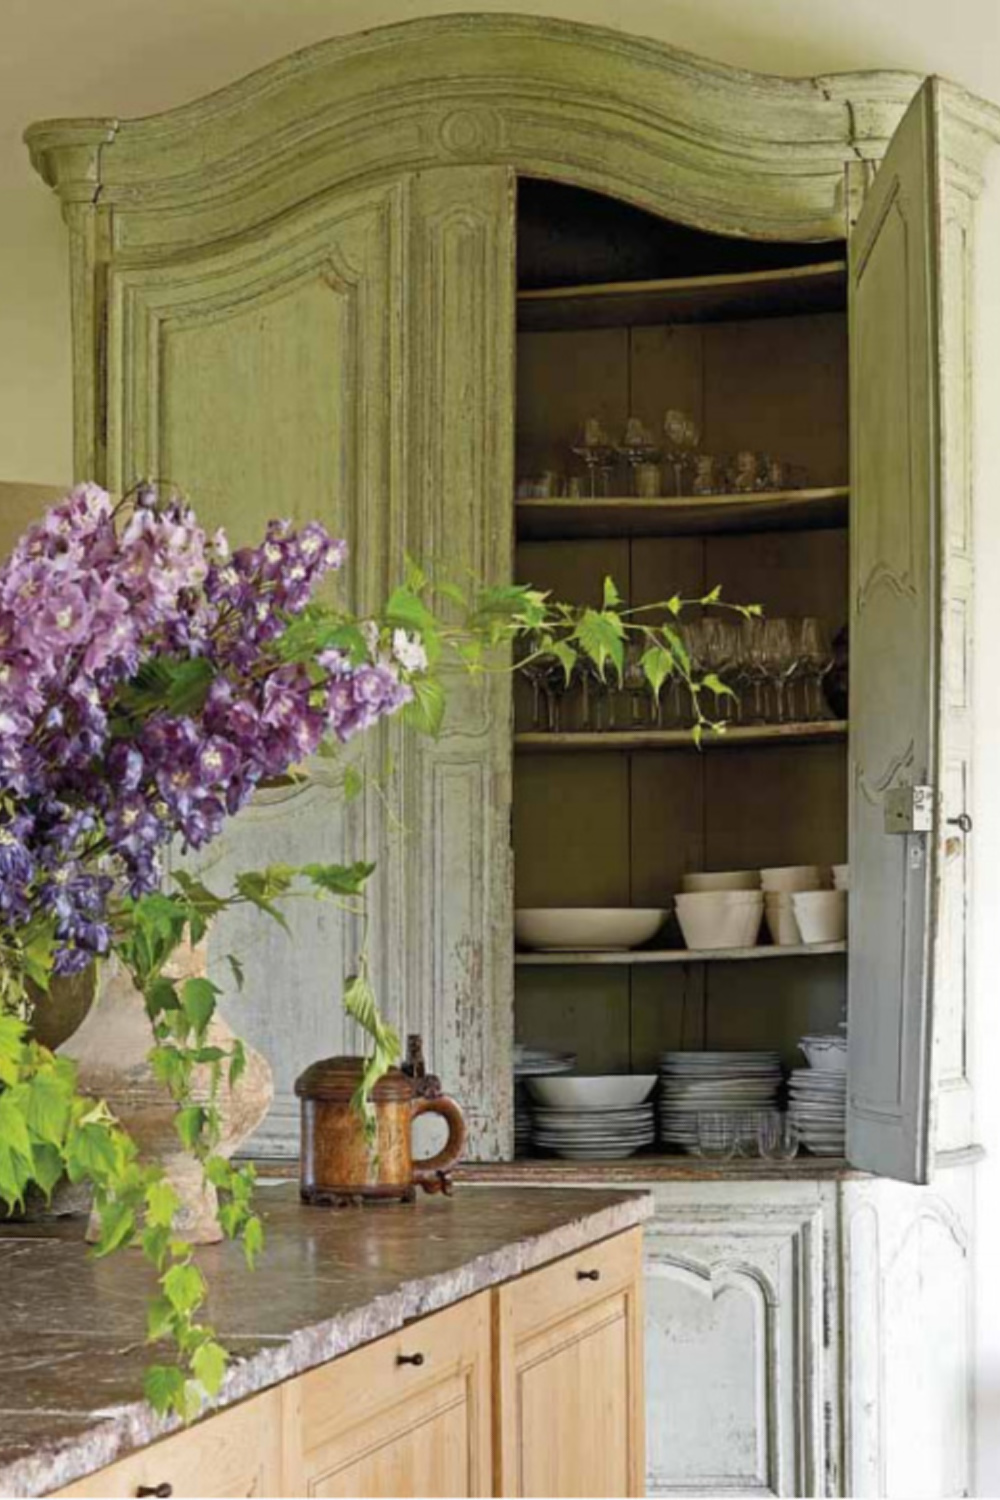 Exquisite Belgian kitchen of Brigitte Garnier, an antiques dealer and owner of The Little Monastery near Bruges.